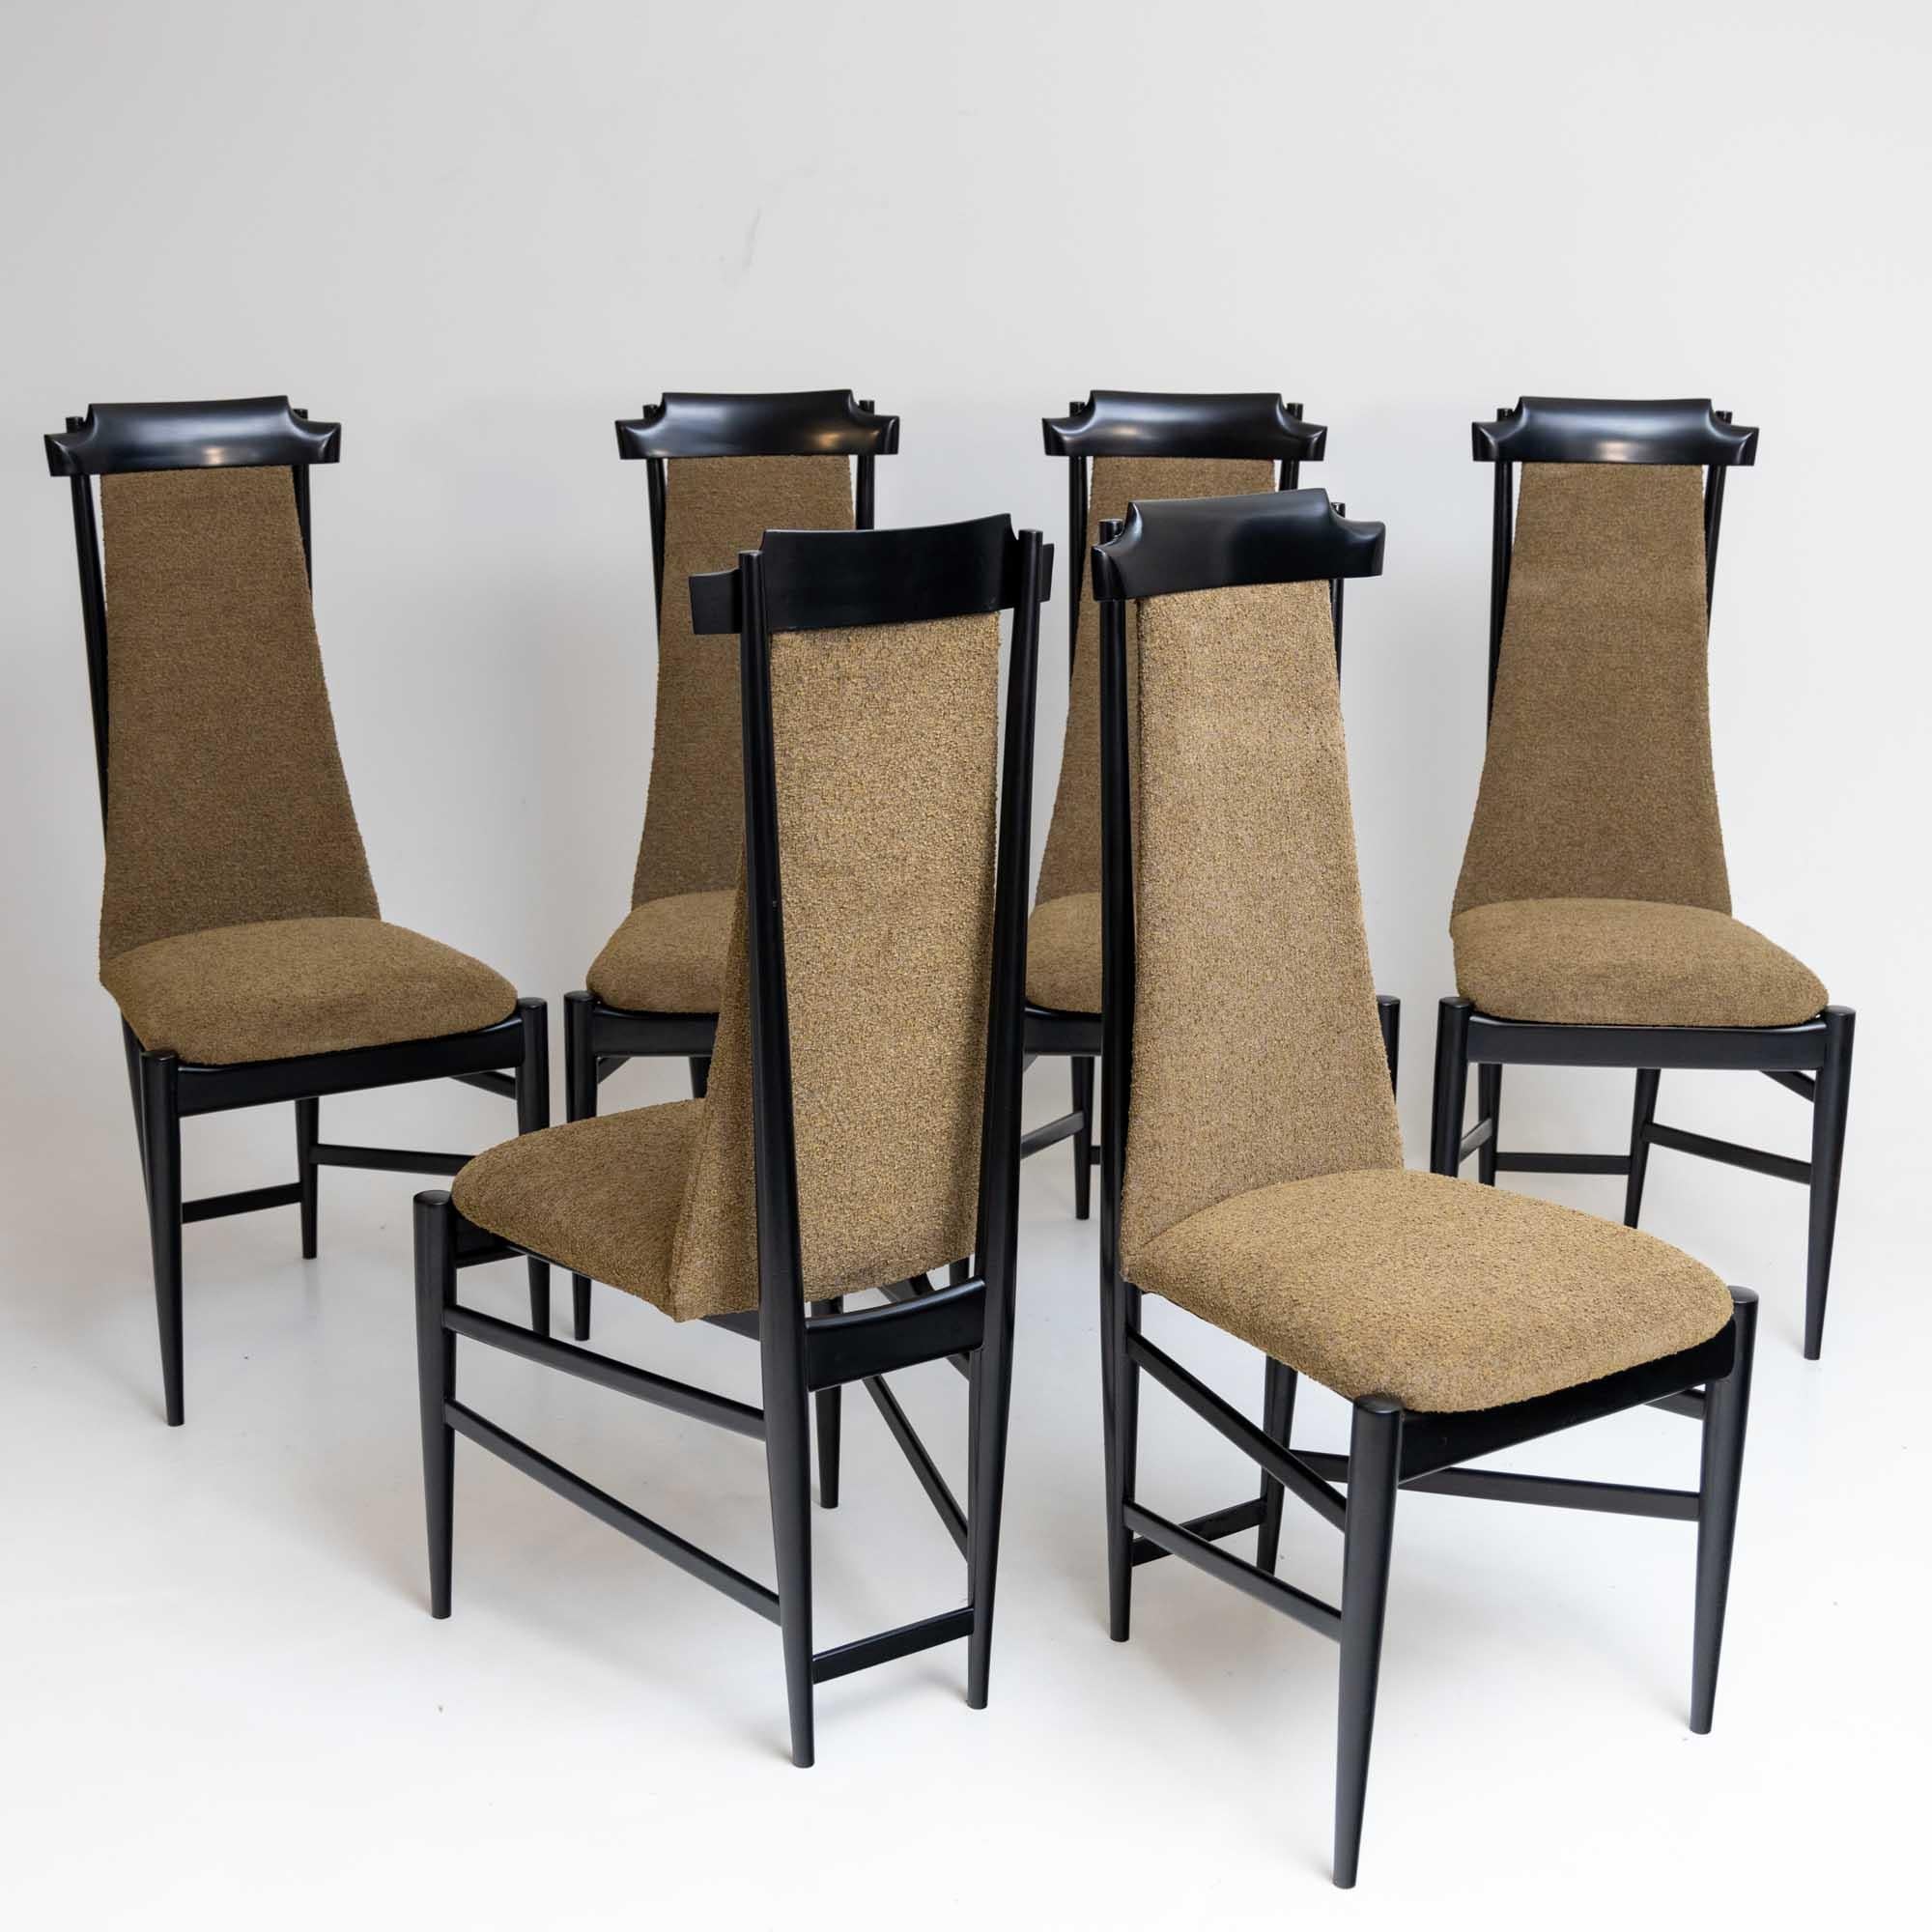 Set of six dining chairs designed by Sergio Rodrigues (Brazil, 1927-2014) in the 1960s. The chairs have an elegant, ebonized frame with high backrests and trapezoidal seats. The chairs have been polished and reupholstered with olive green bouclé.